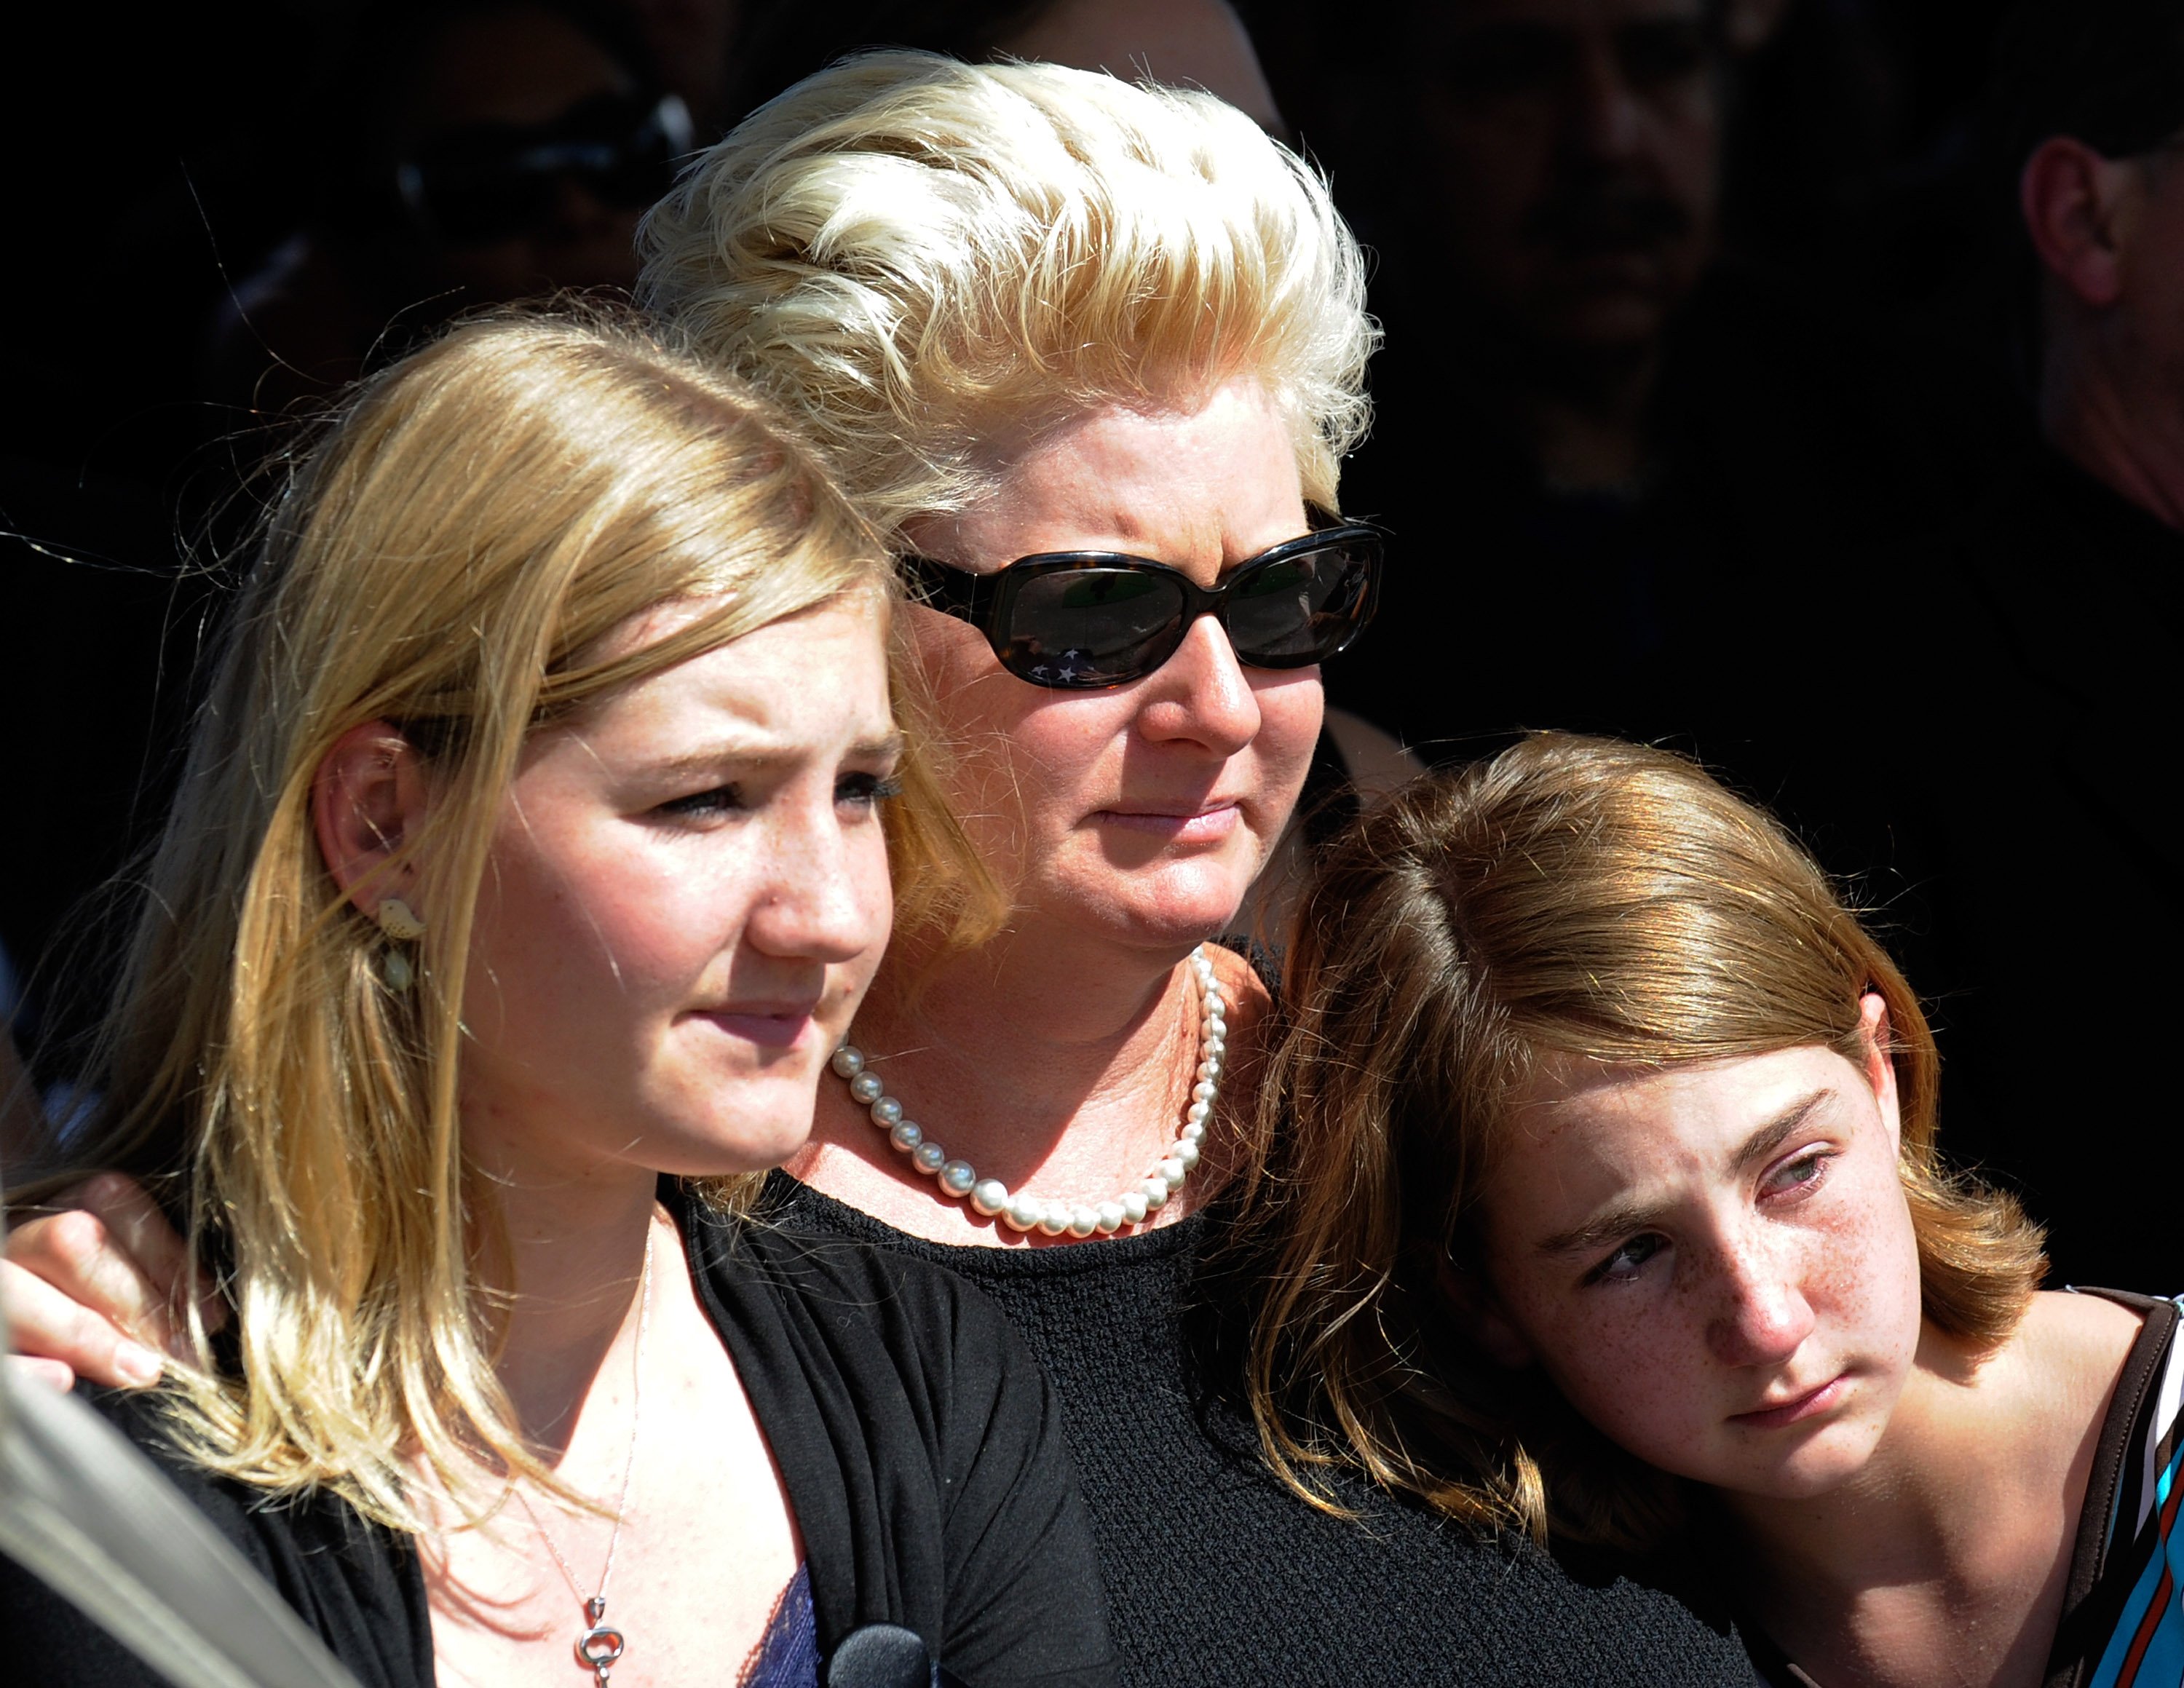 Jill Vandenberg comforting young mourners during the funeral for her late husband Tony Curtis at Palm Mortuary & Cemetery on October 4, 2010, in Henderson, Nevada | Source: Getty Images